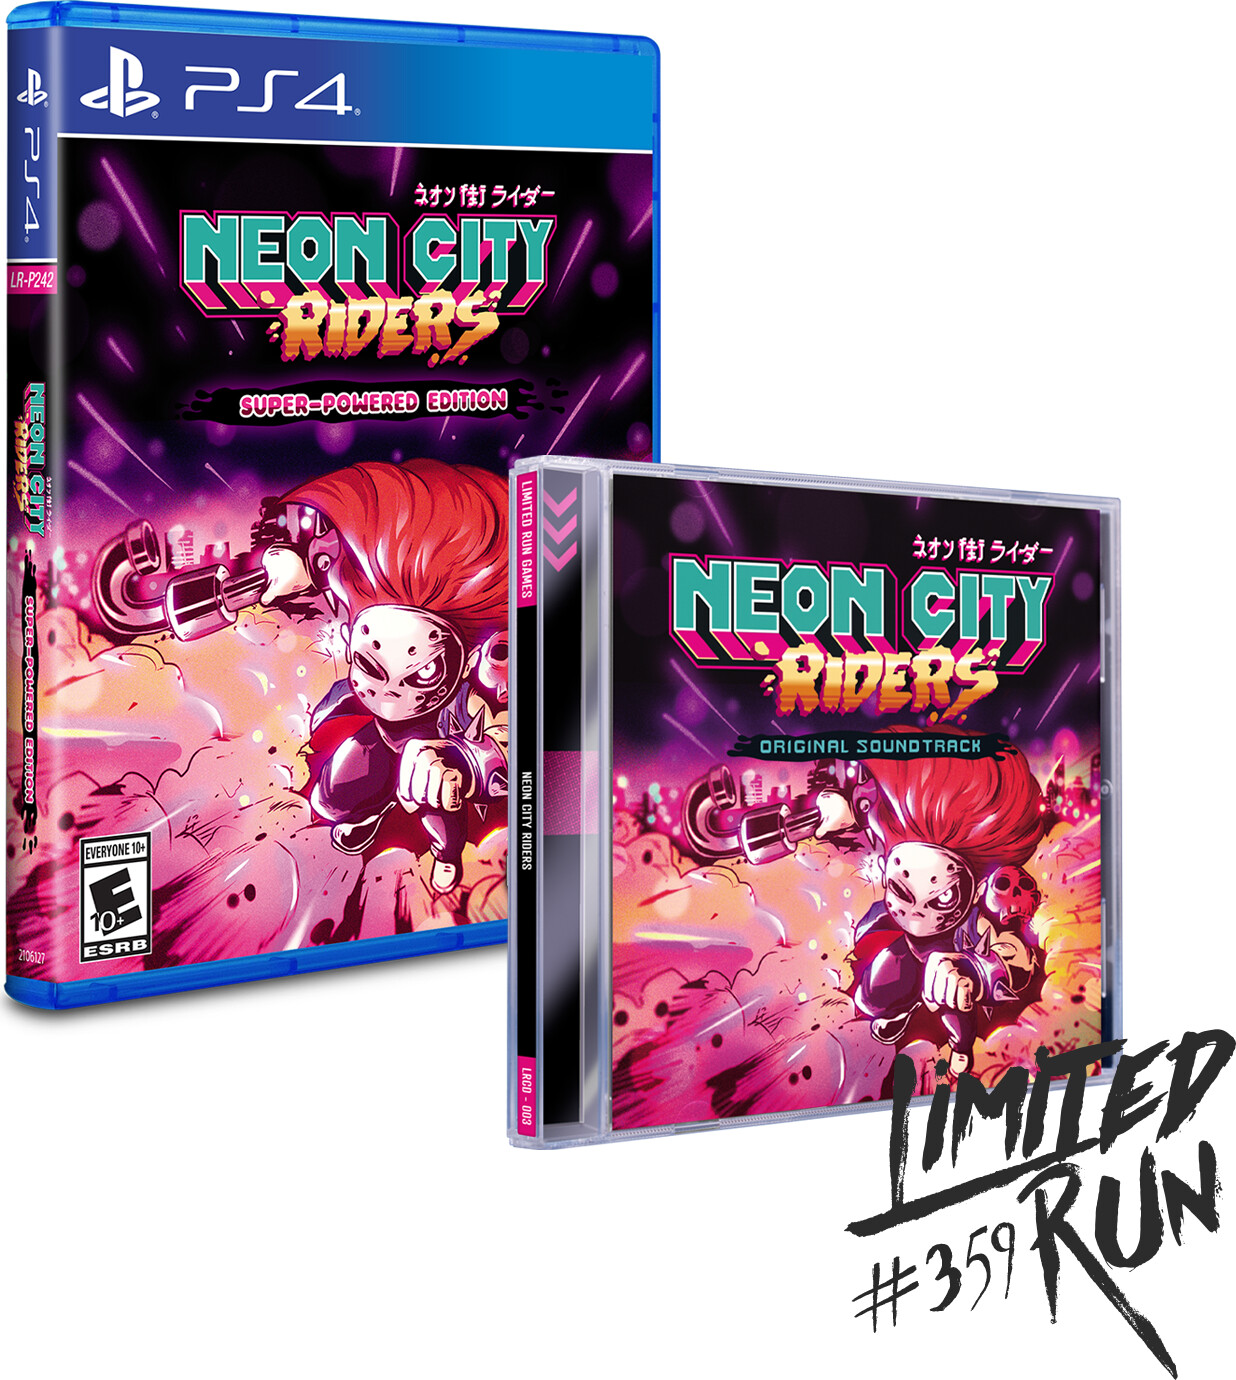 Se Neon City Riders - Super-powered Edition (limited Run #359) (import) - PS4 hos Gucca.dk